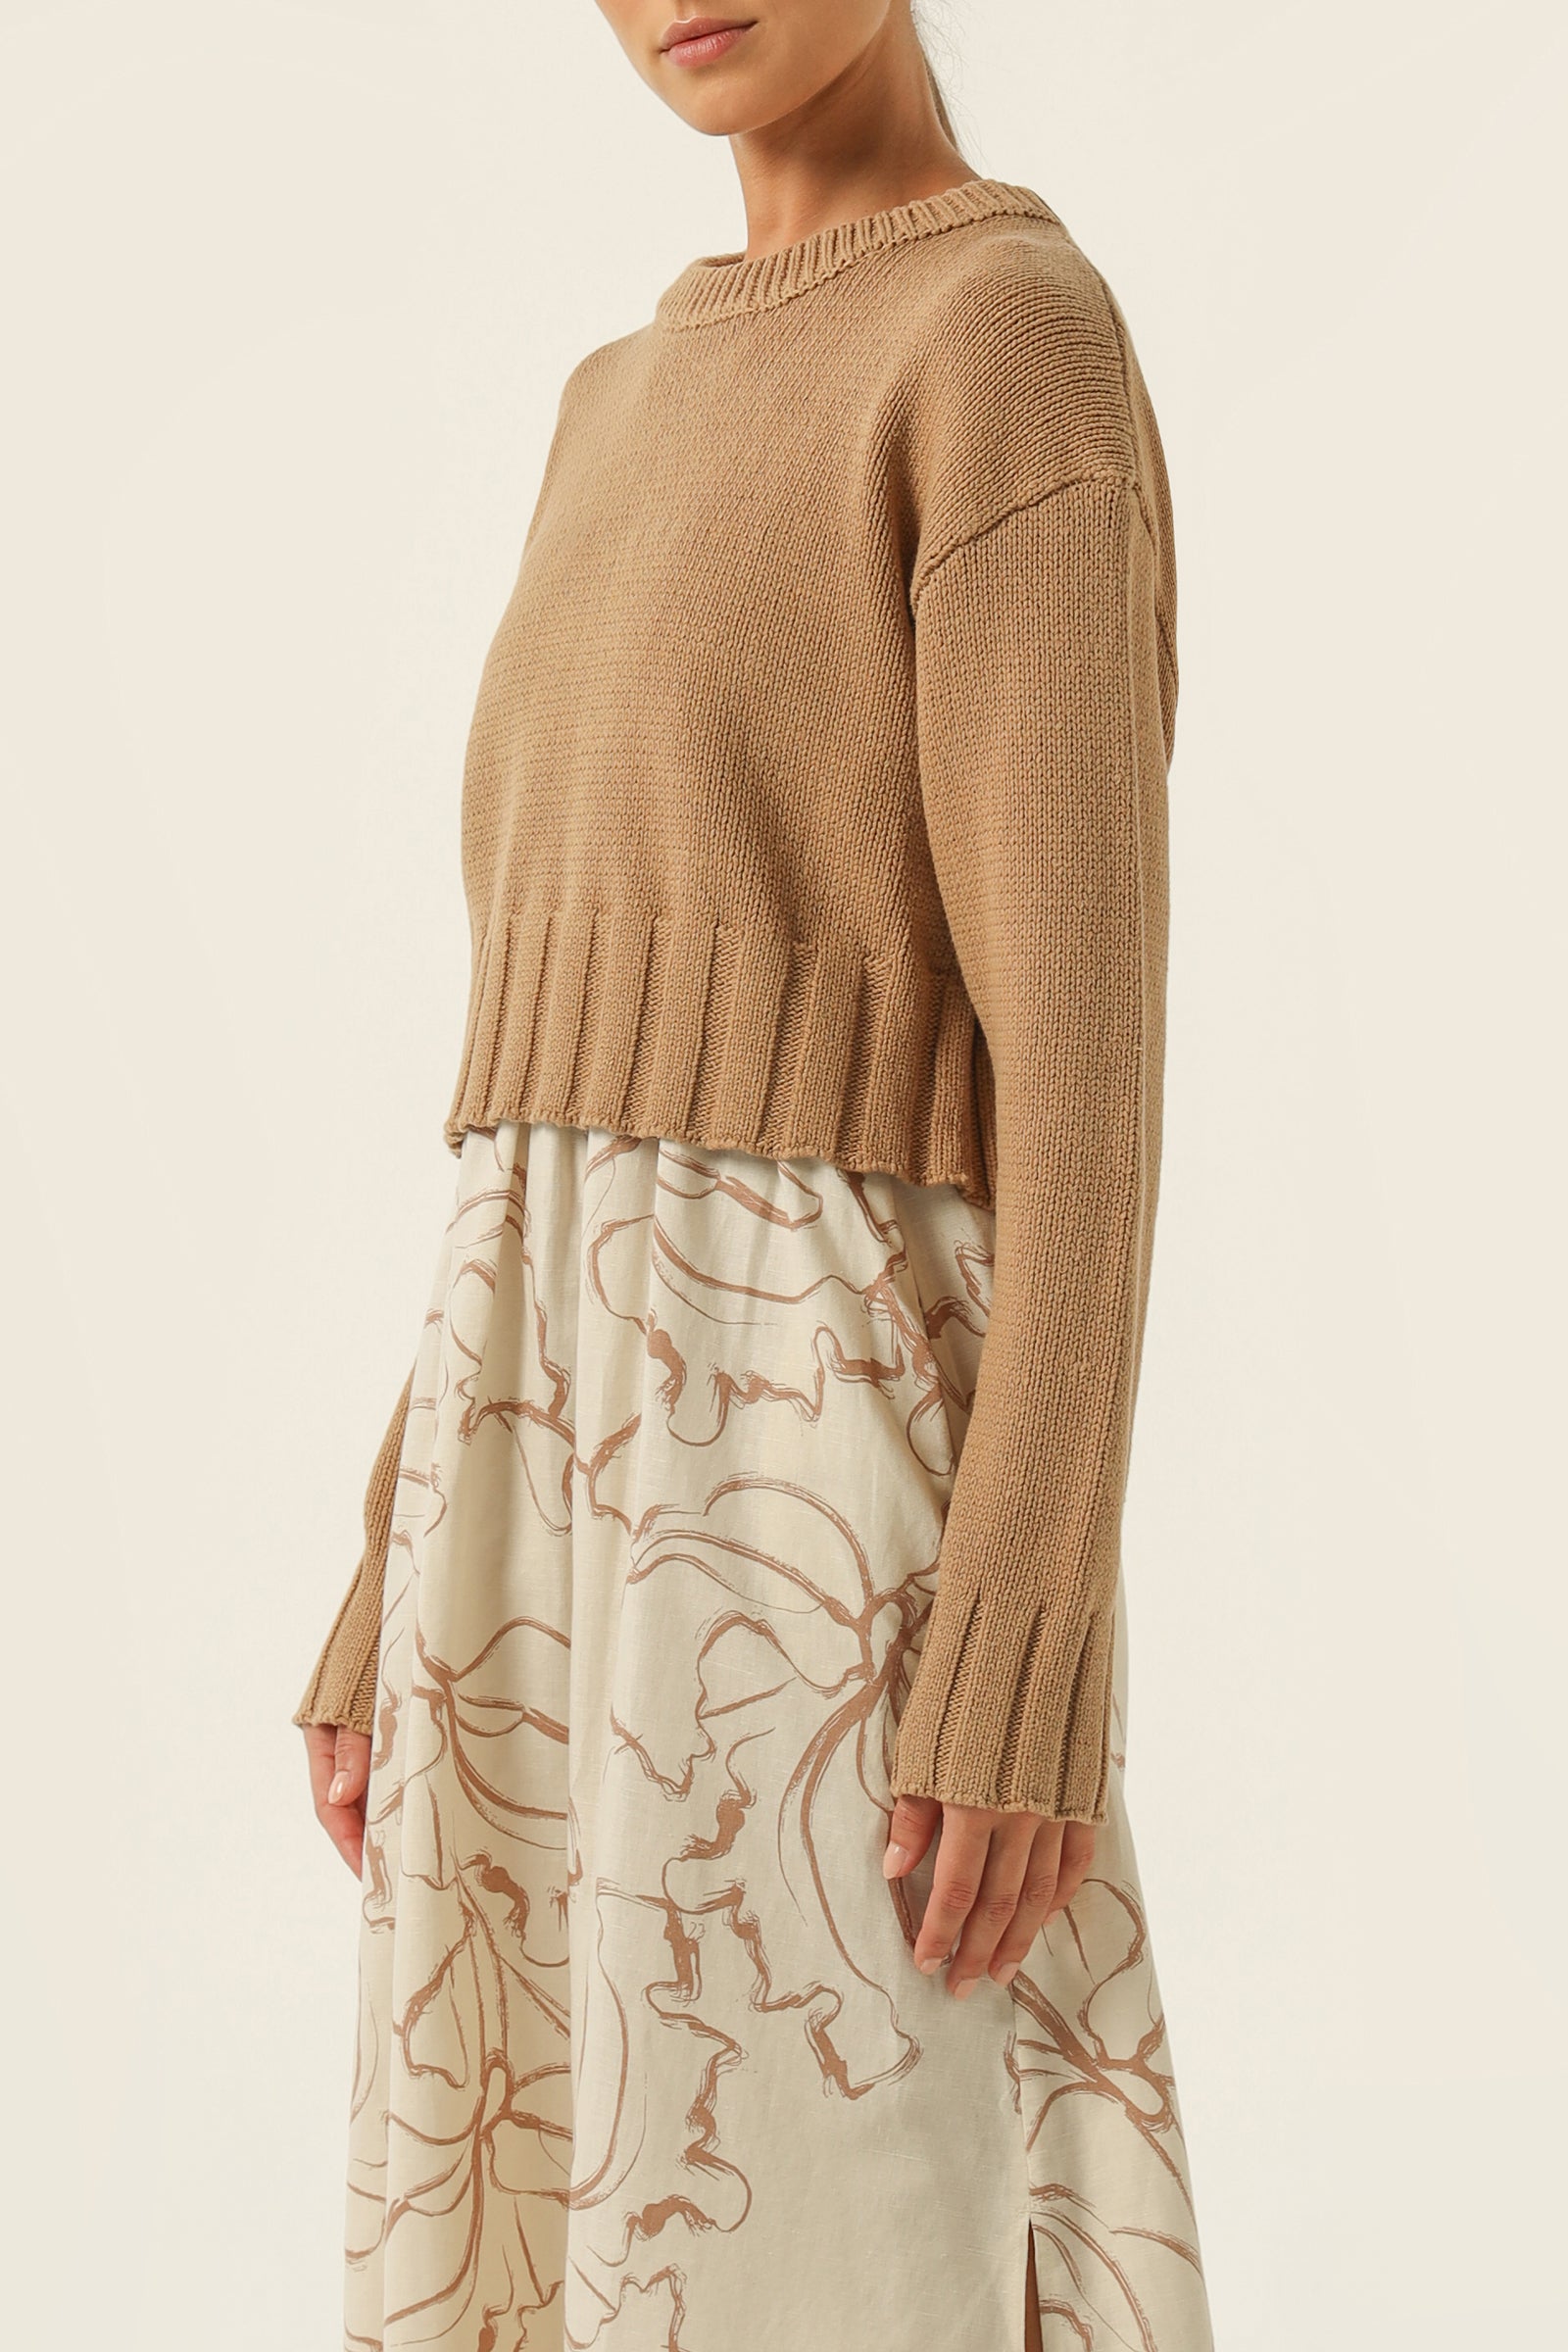 Nude Lucy Rory Knit Jumper in a Brown Coffee Colour